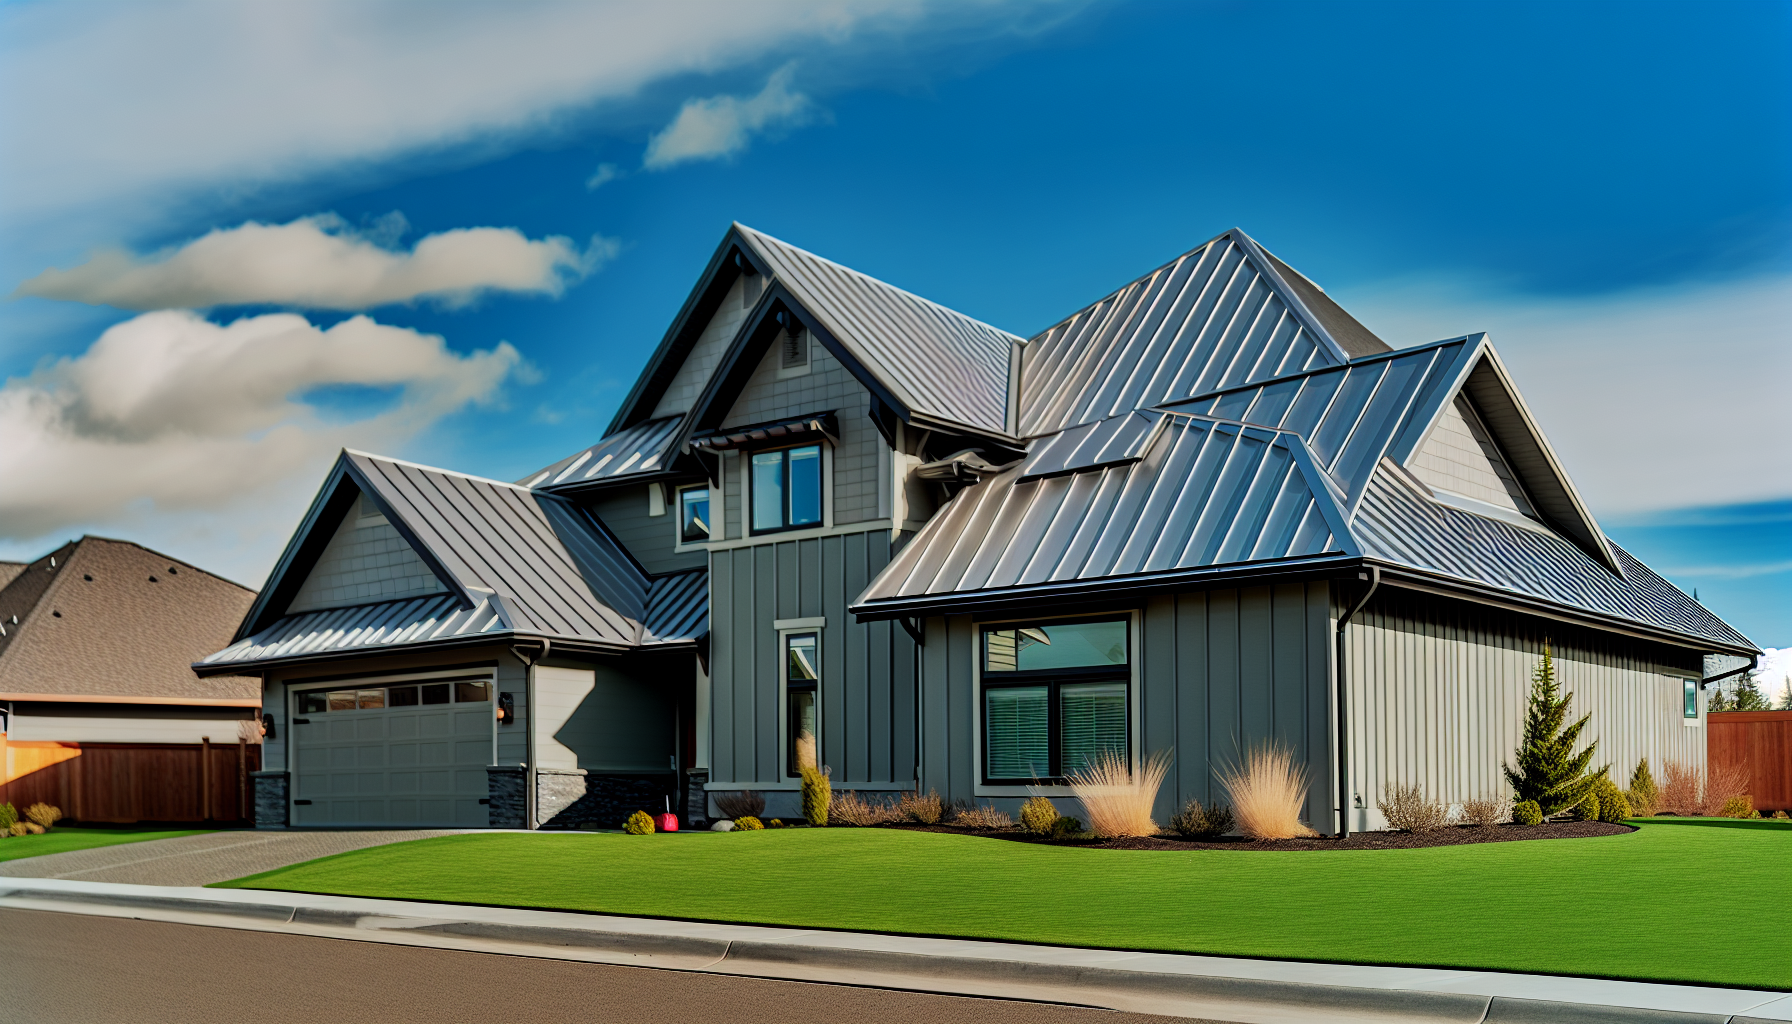 A residential property with a standing seam metal roof showcasing its durability and aesthetic appeal